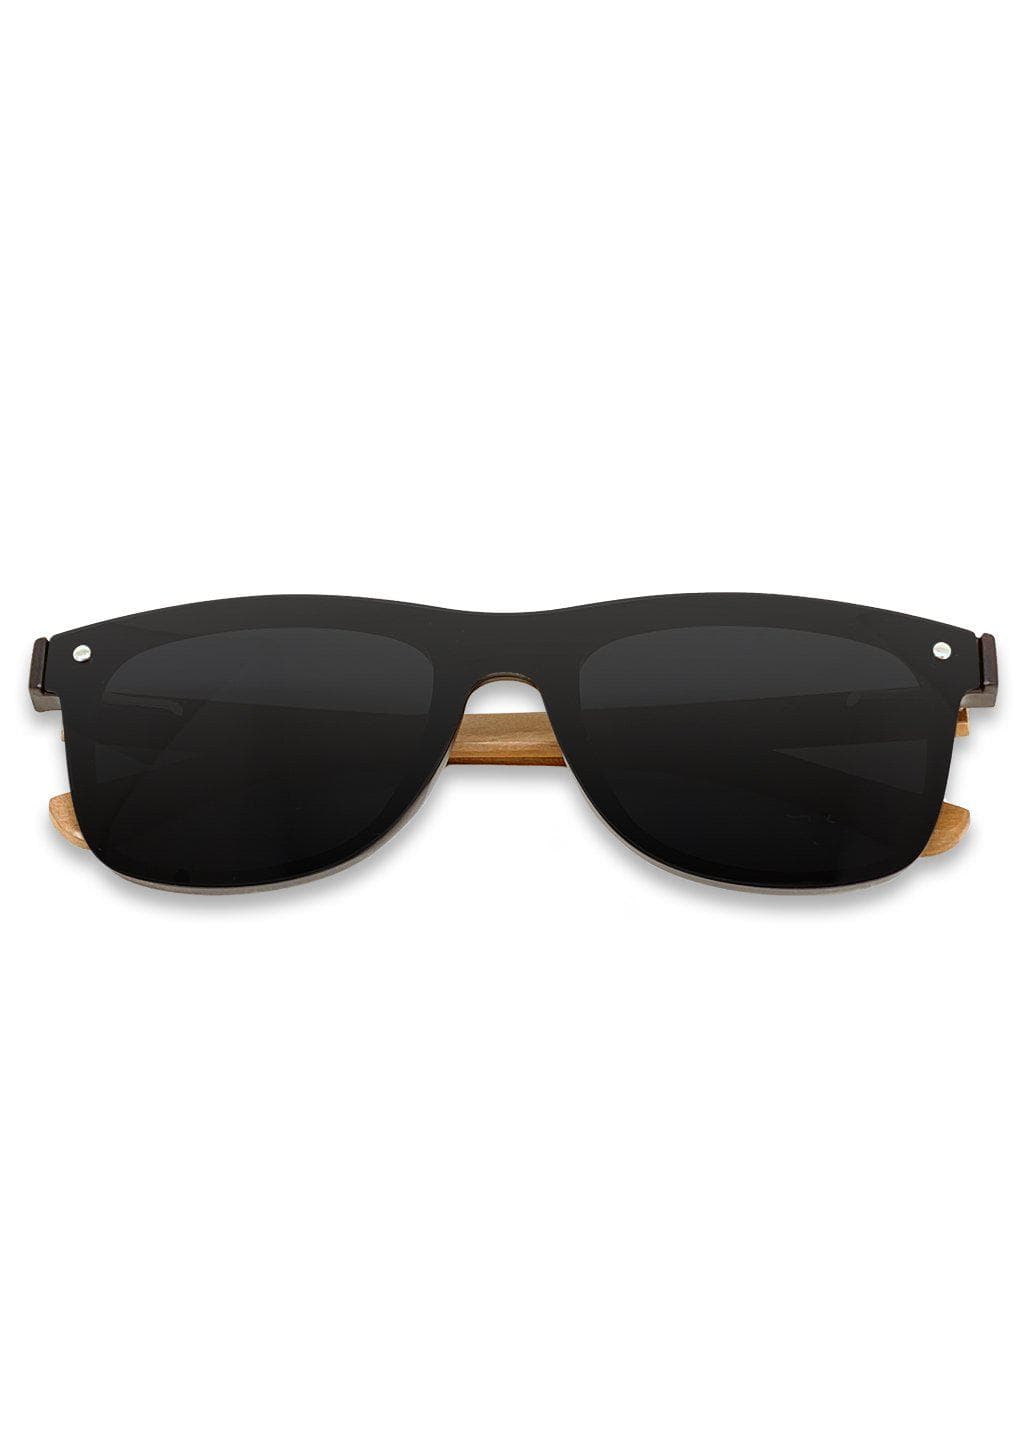 Eyewood tomorrow is our modern cool take on classic models. This is Taurus with black lenses. Nice wooden sunglasses.